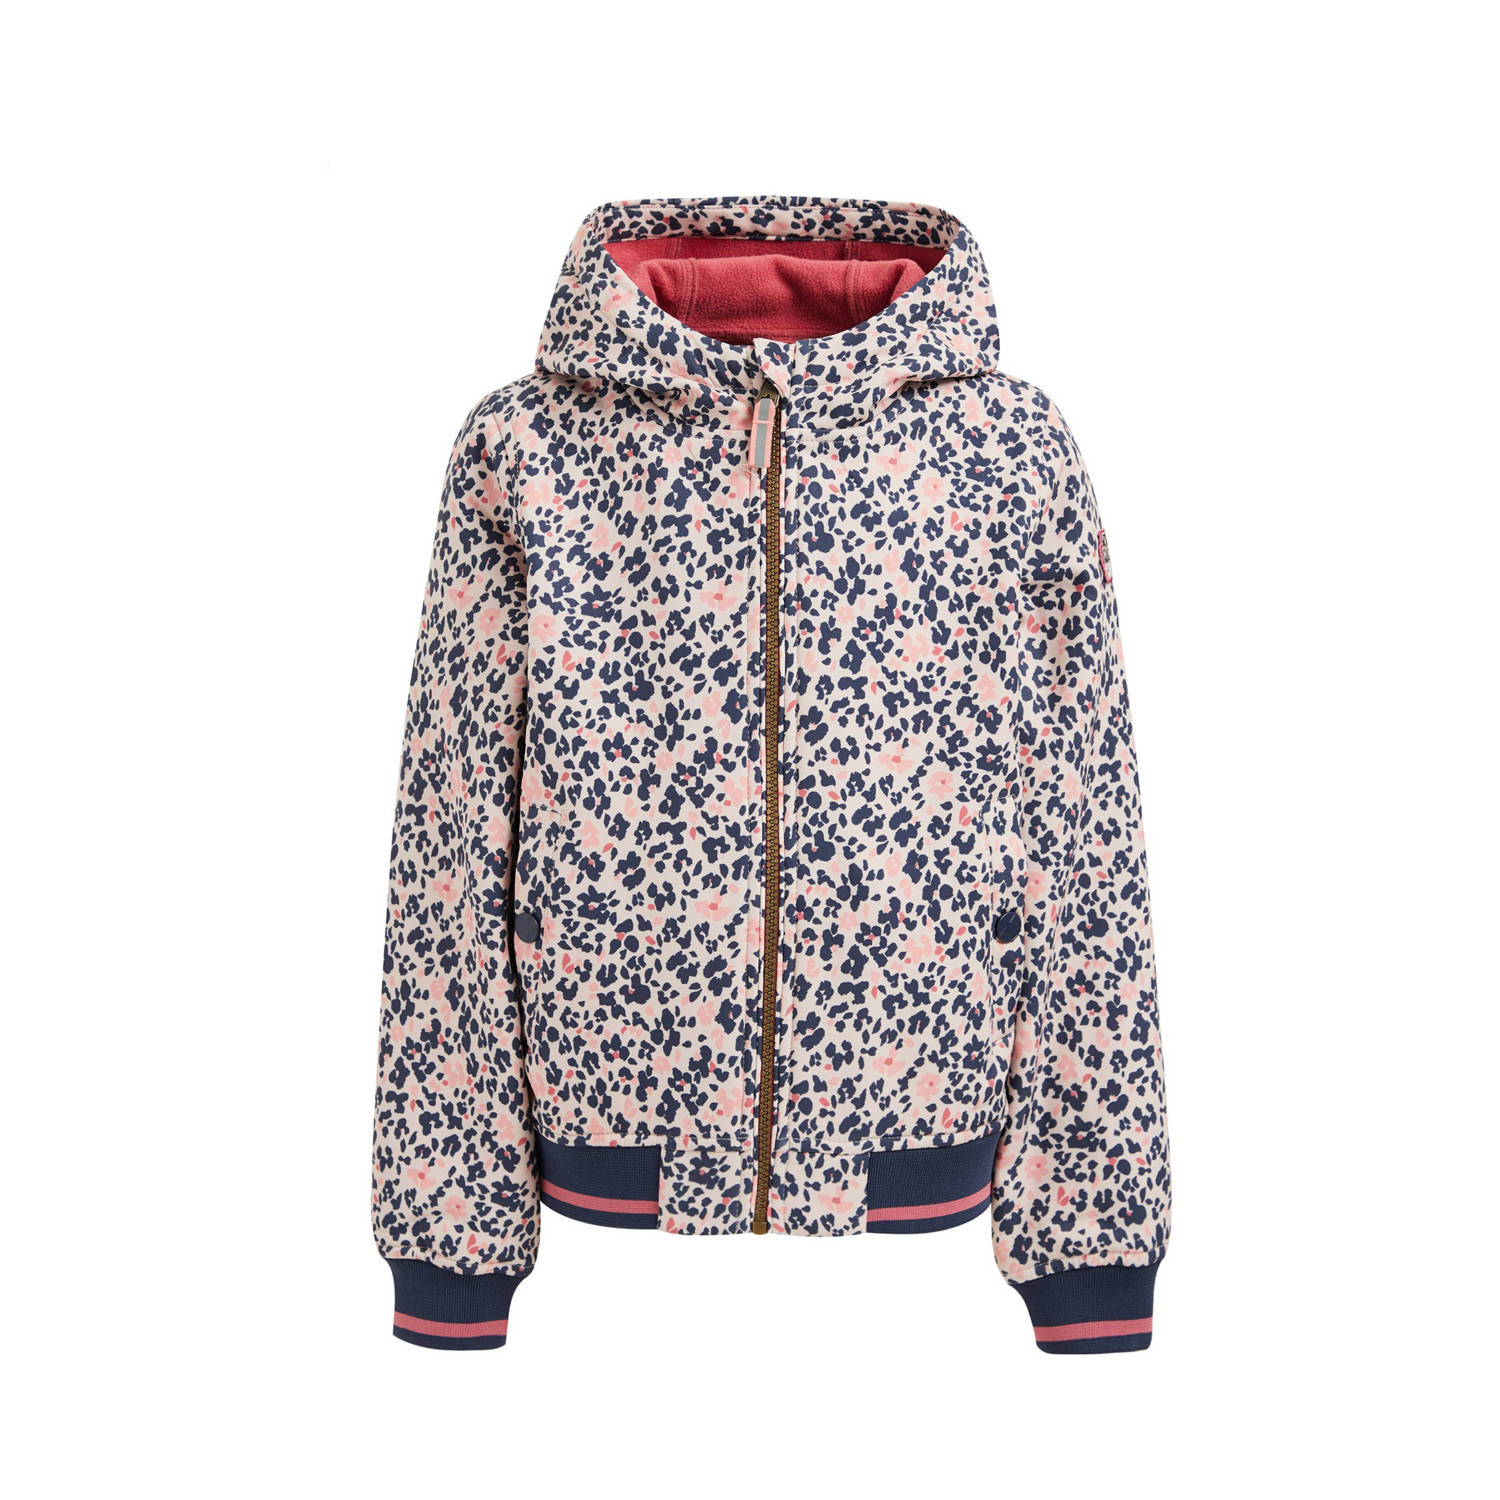 WE Fashion softshell jas met all over print roze donkerblauw Meisjes Polyester Capuchon 110 116